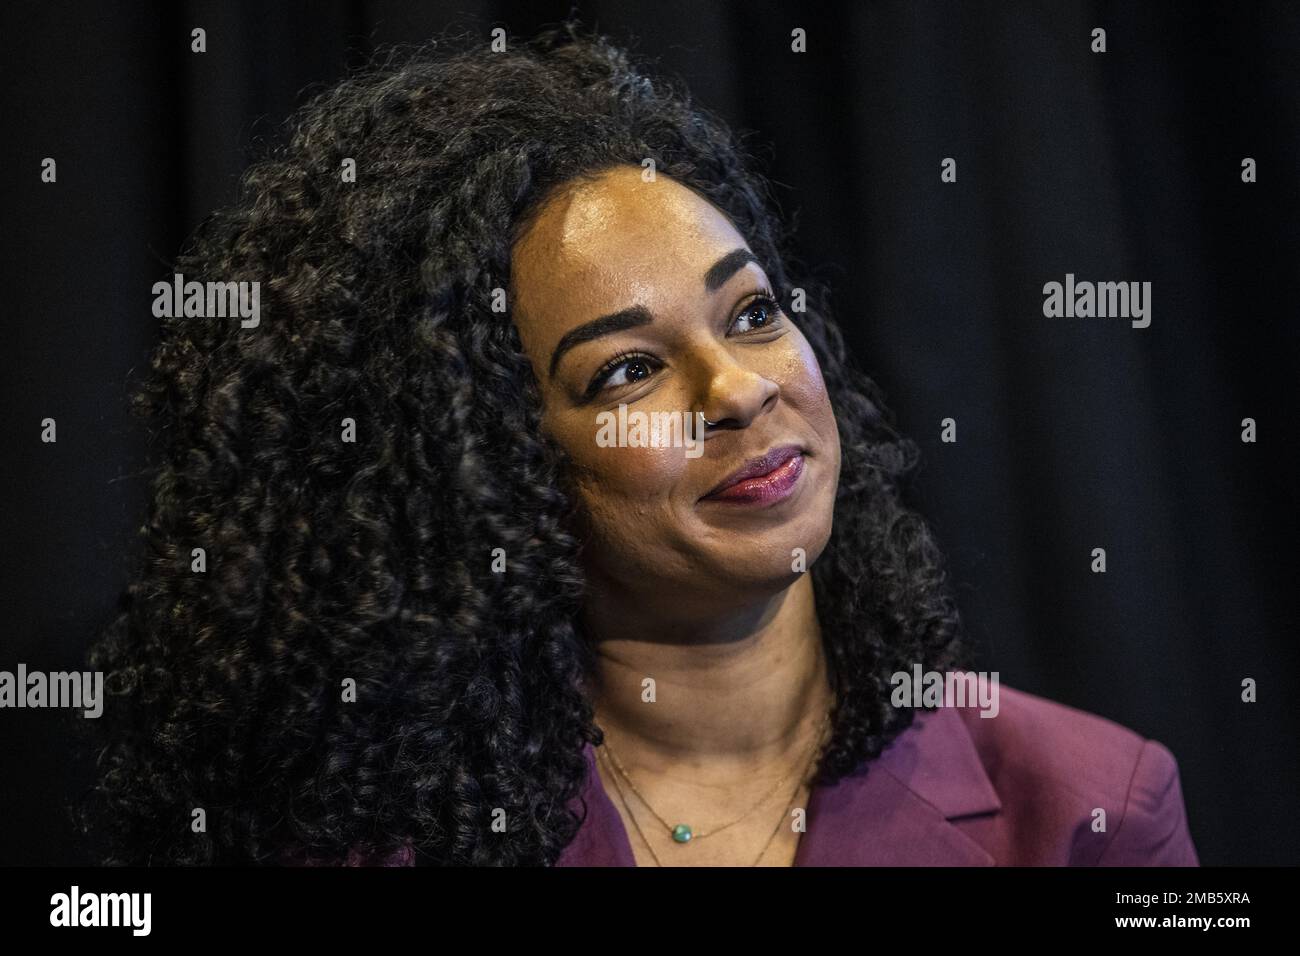 GRONINGEN - Media maker Veronica van Hoogdalem is awarded the Pop Media Prize at Eurosonic Noorderslag. This prize looks at the entire oeuvre of someone from the media, related to pop music. ANP VINCENT JANNINK netherlands out - belgium out Credit: ANP/Alamy Live News Stock Photo